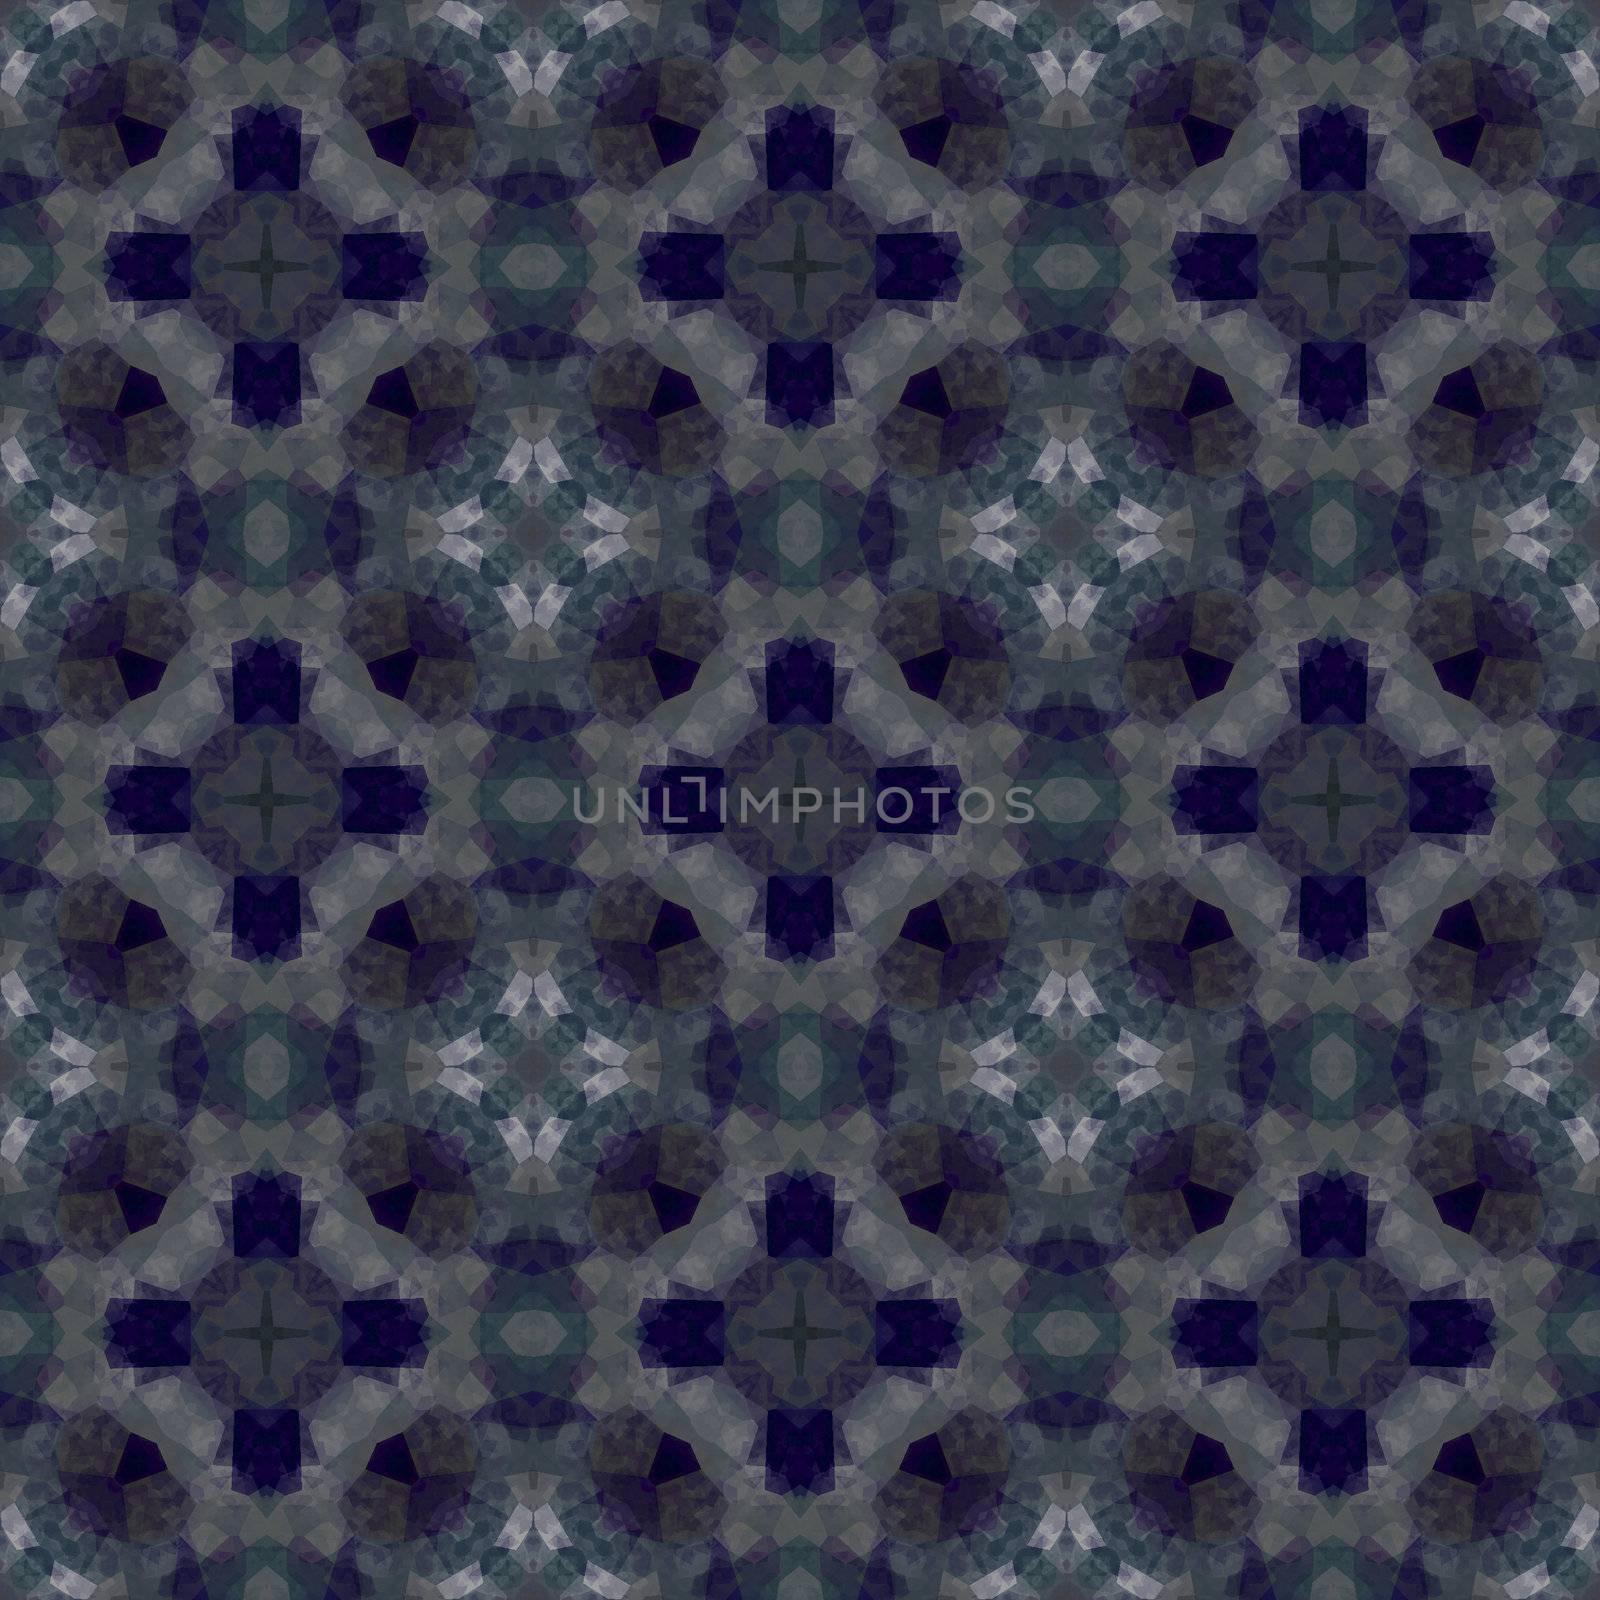 Church window pattern in different shades of blue. Seamless tile.